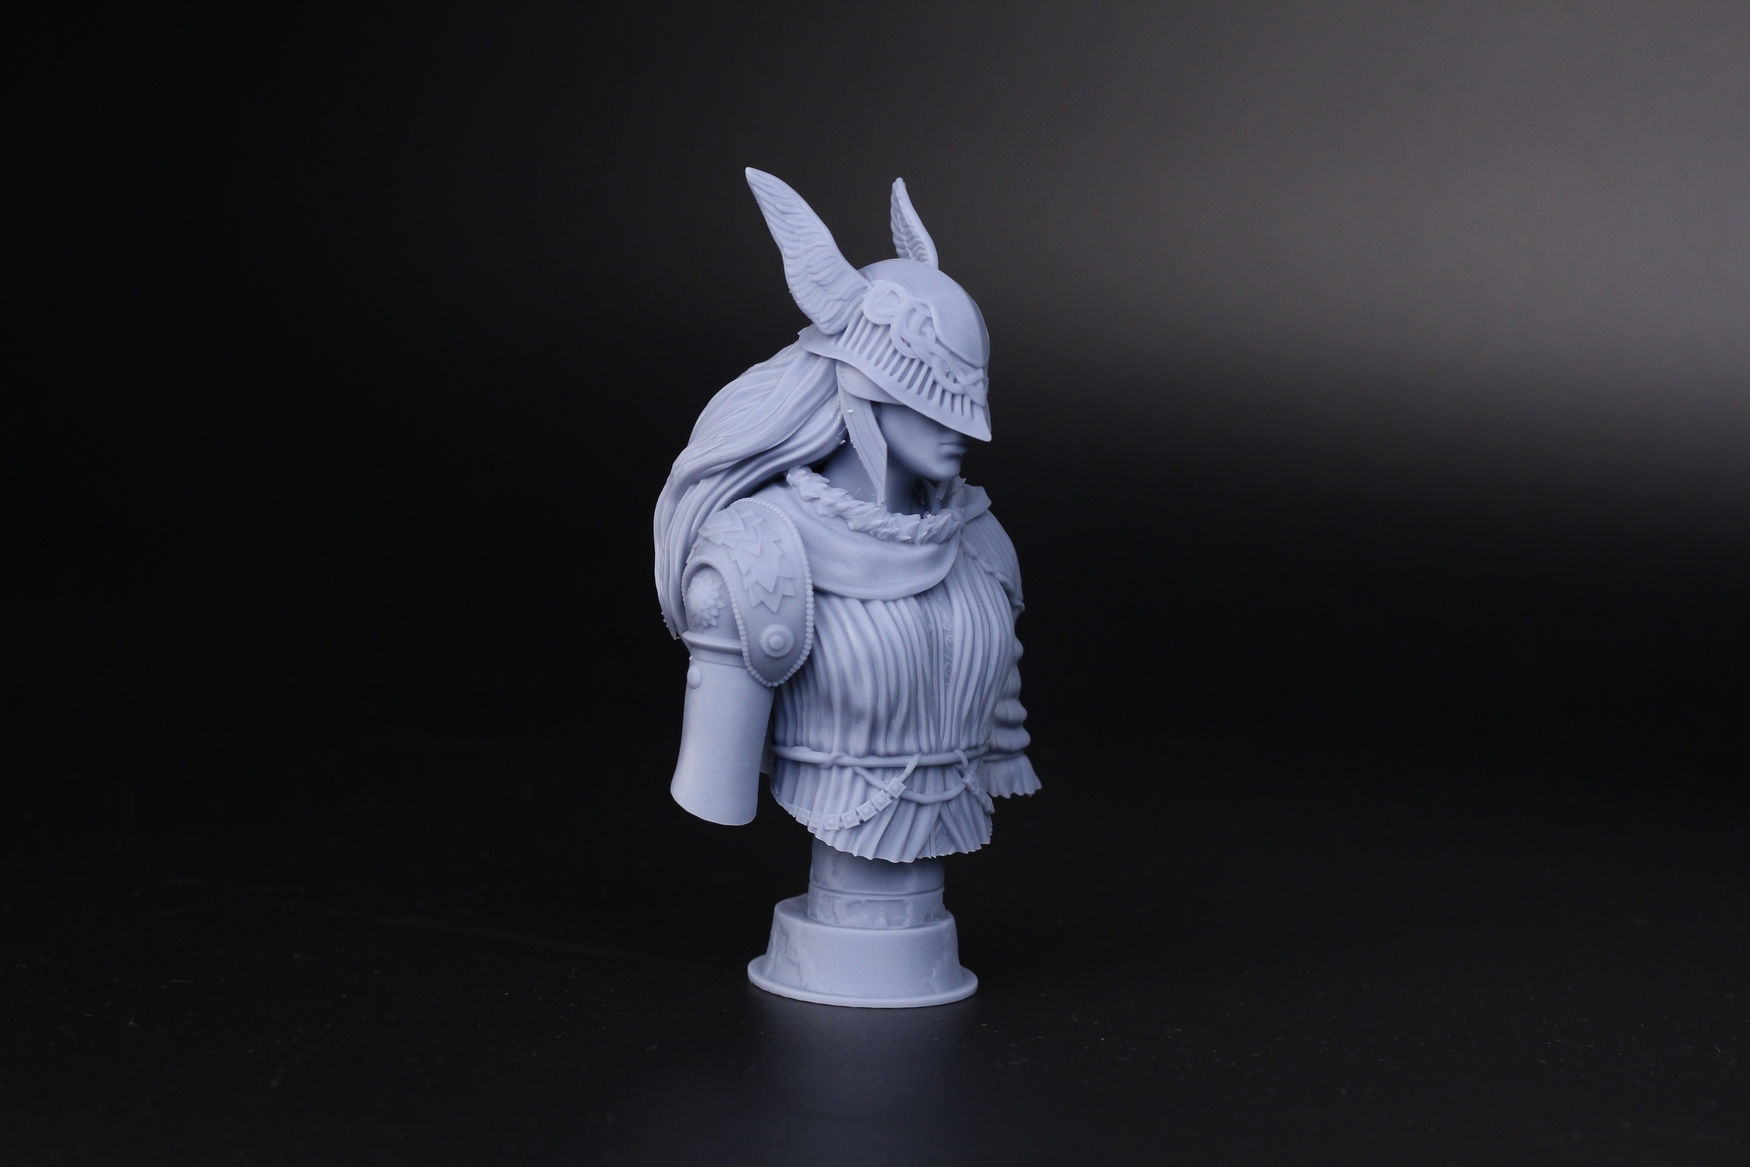 Malenia Bust printed on Anycubic M37 | Anycubic Photon M3 Review: Bridging the gap